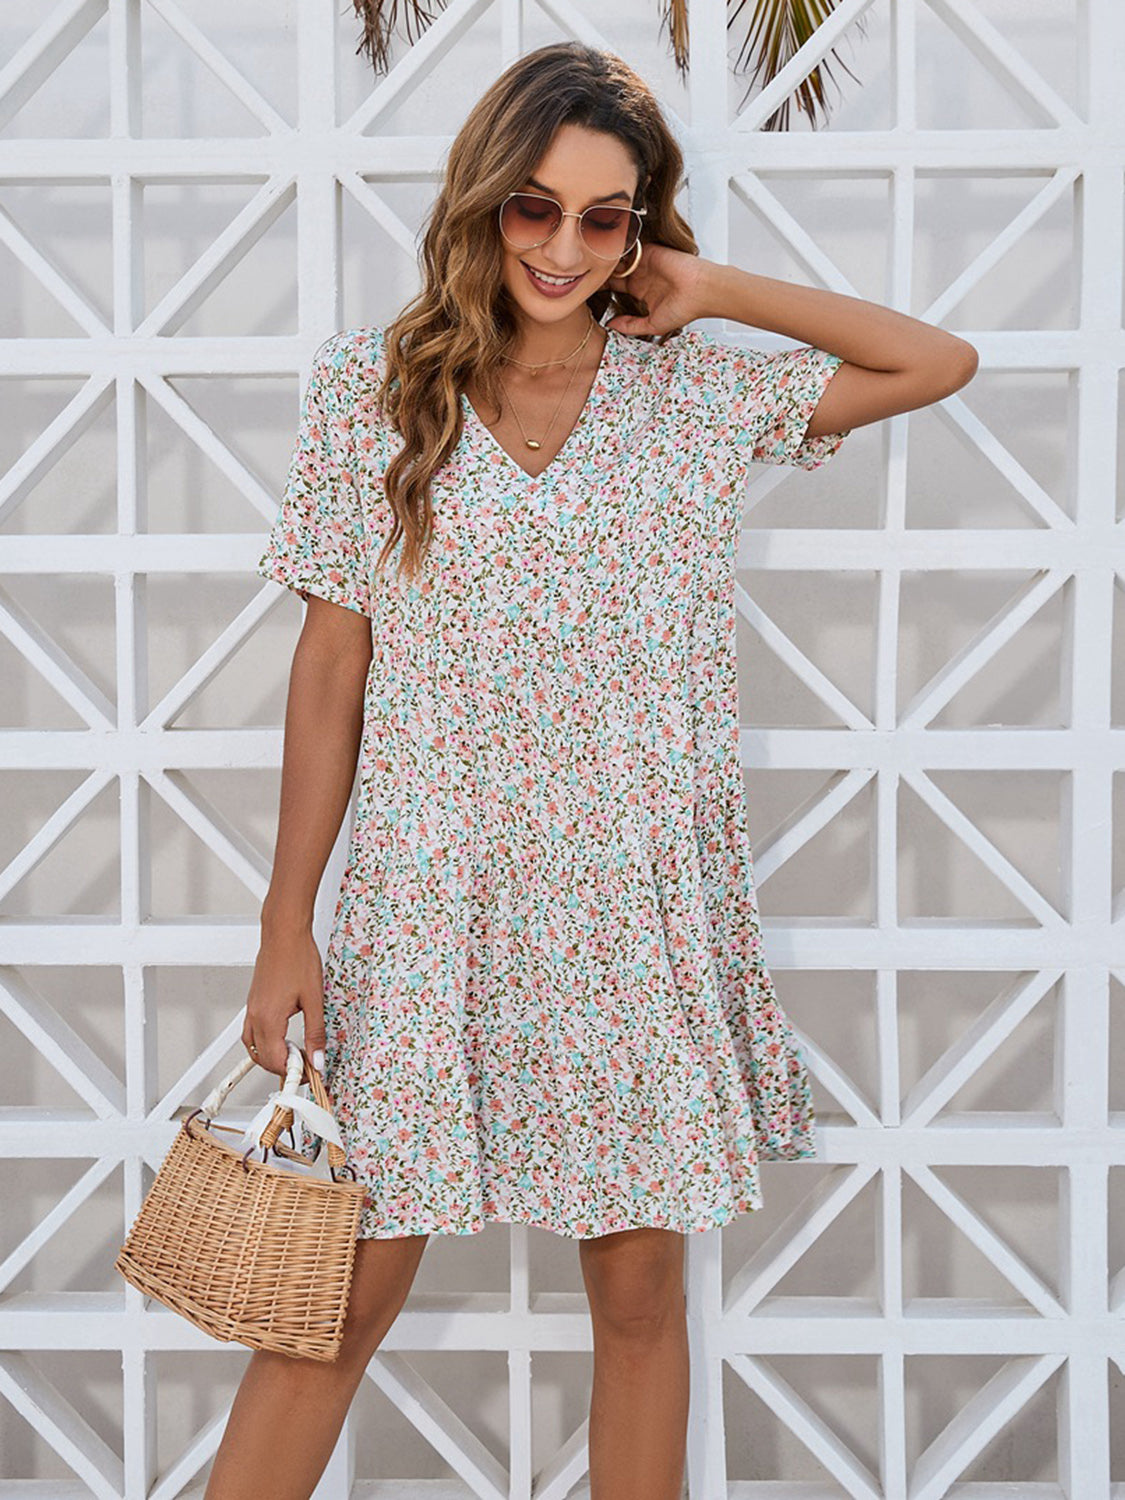 Chic Ditsy Floral V-Neck Mini Dress: Perfect for Summer Beach Weddings and Women Attendees!